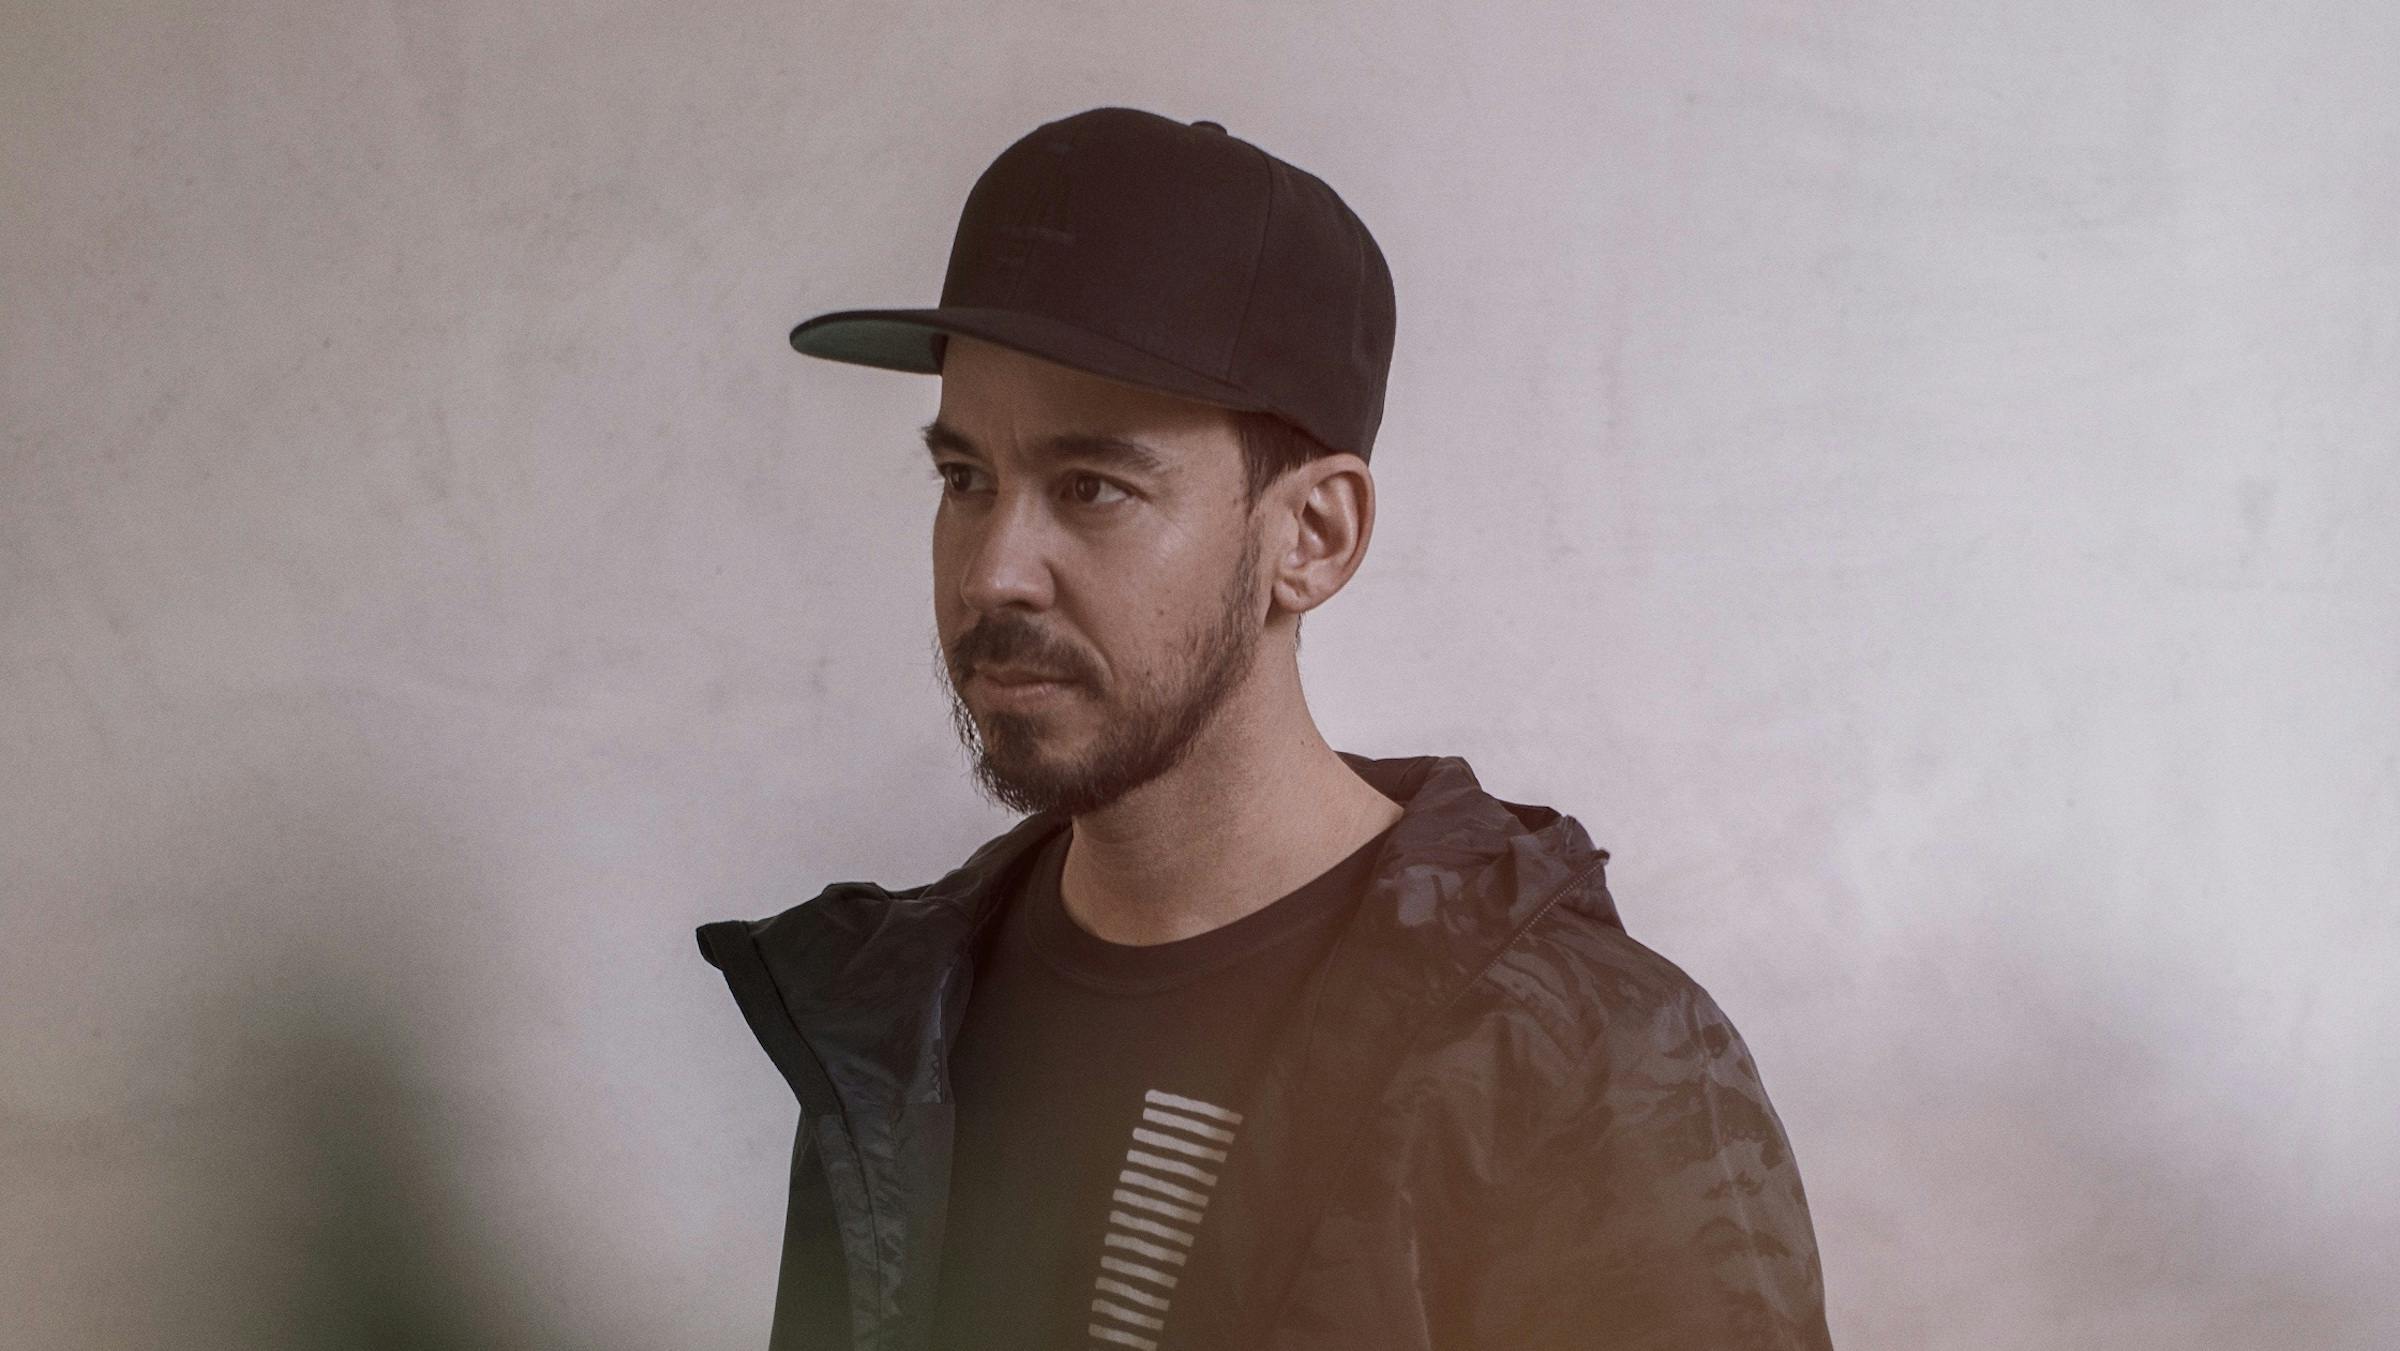 Mike Shinoda On Linkin Park: "It’s Not My Goal To Look For A New Singer"